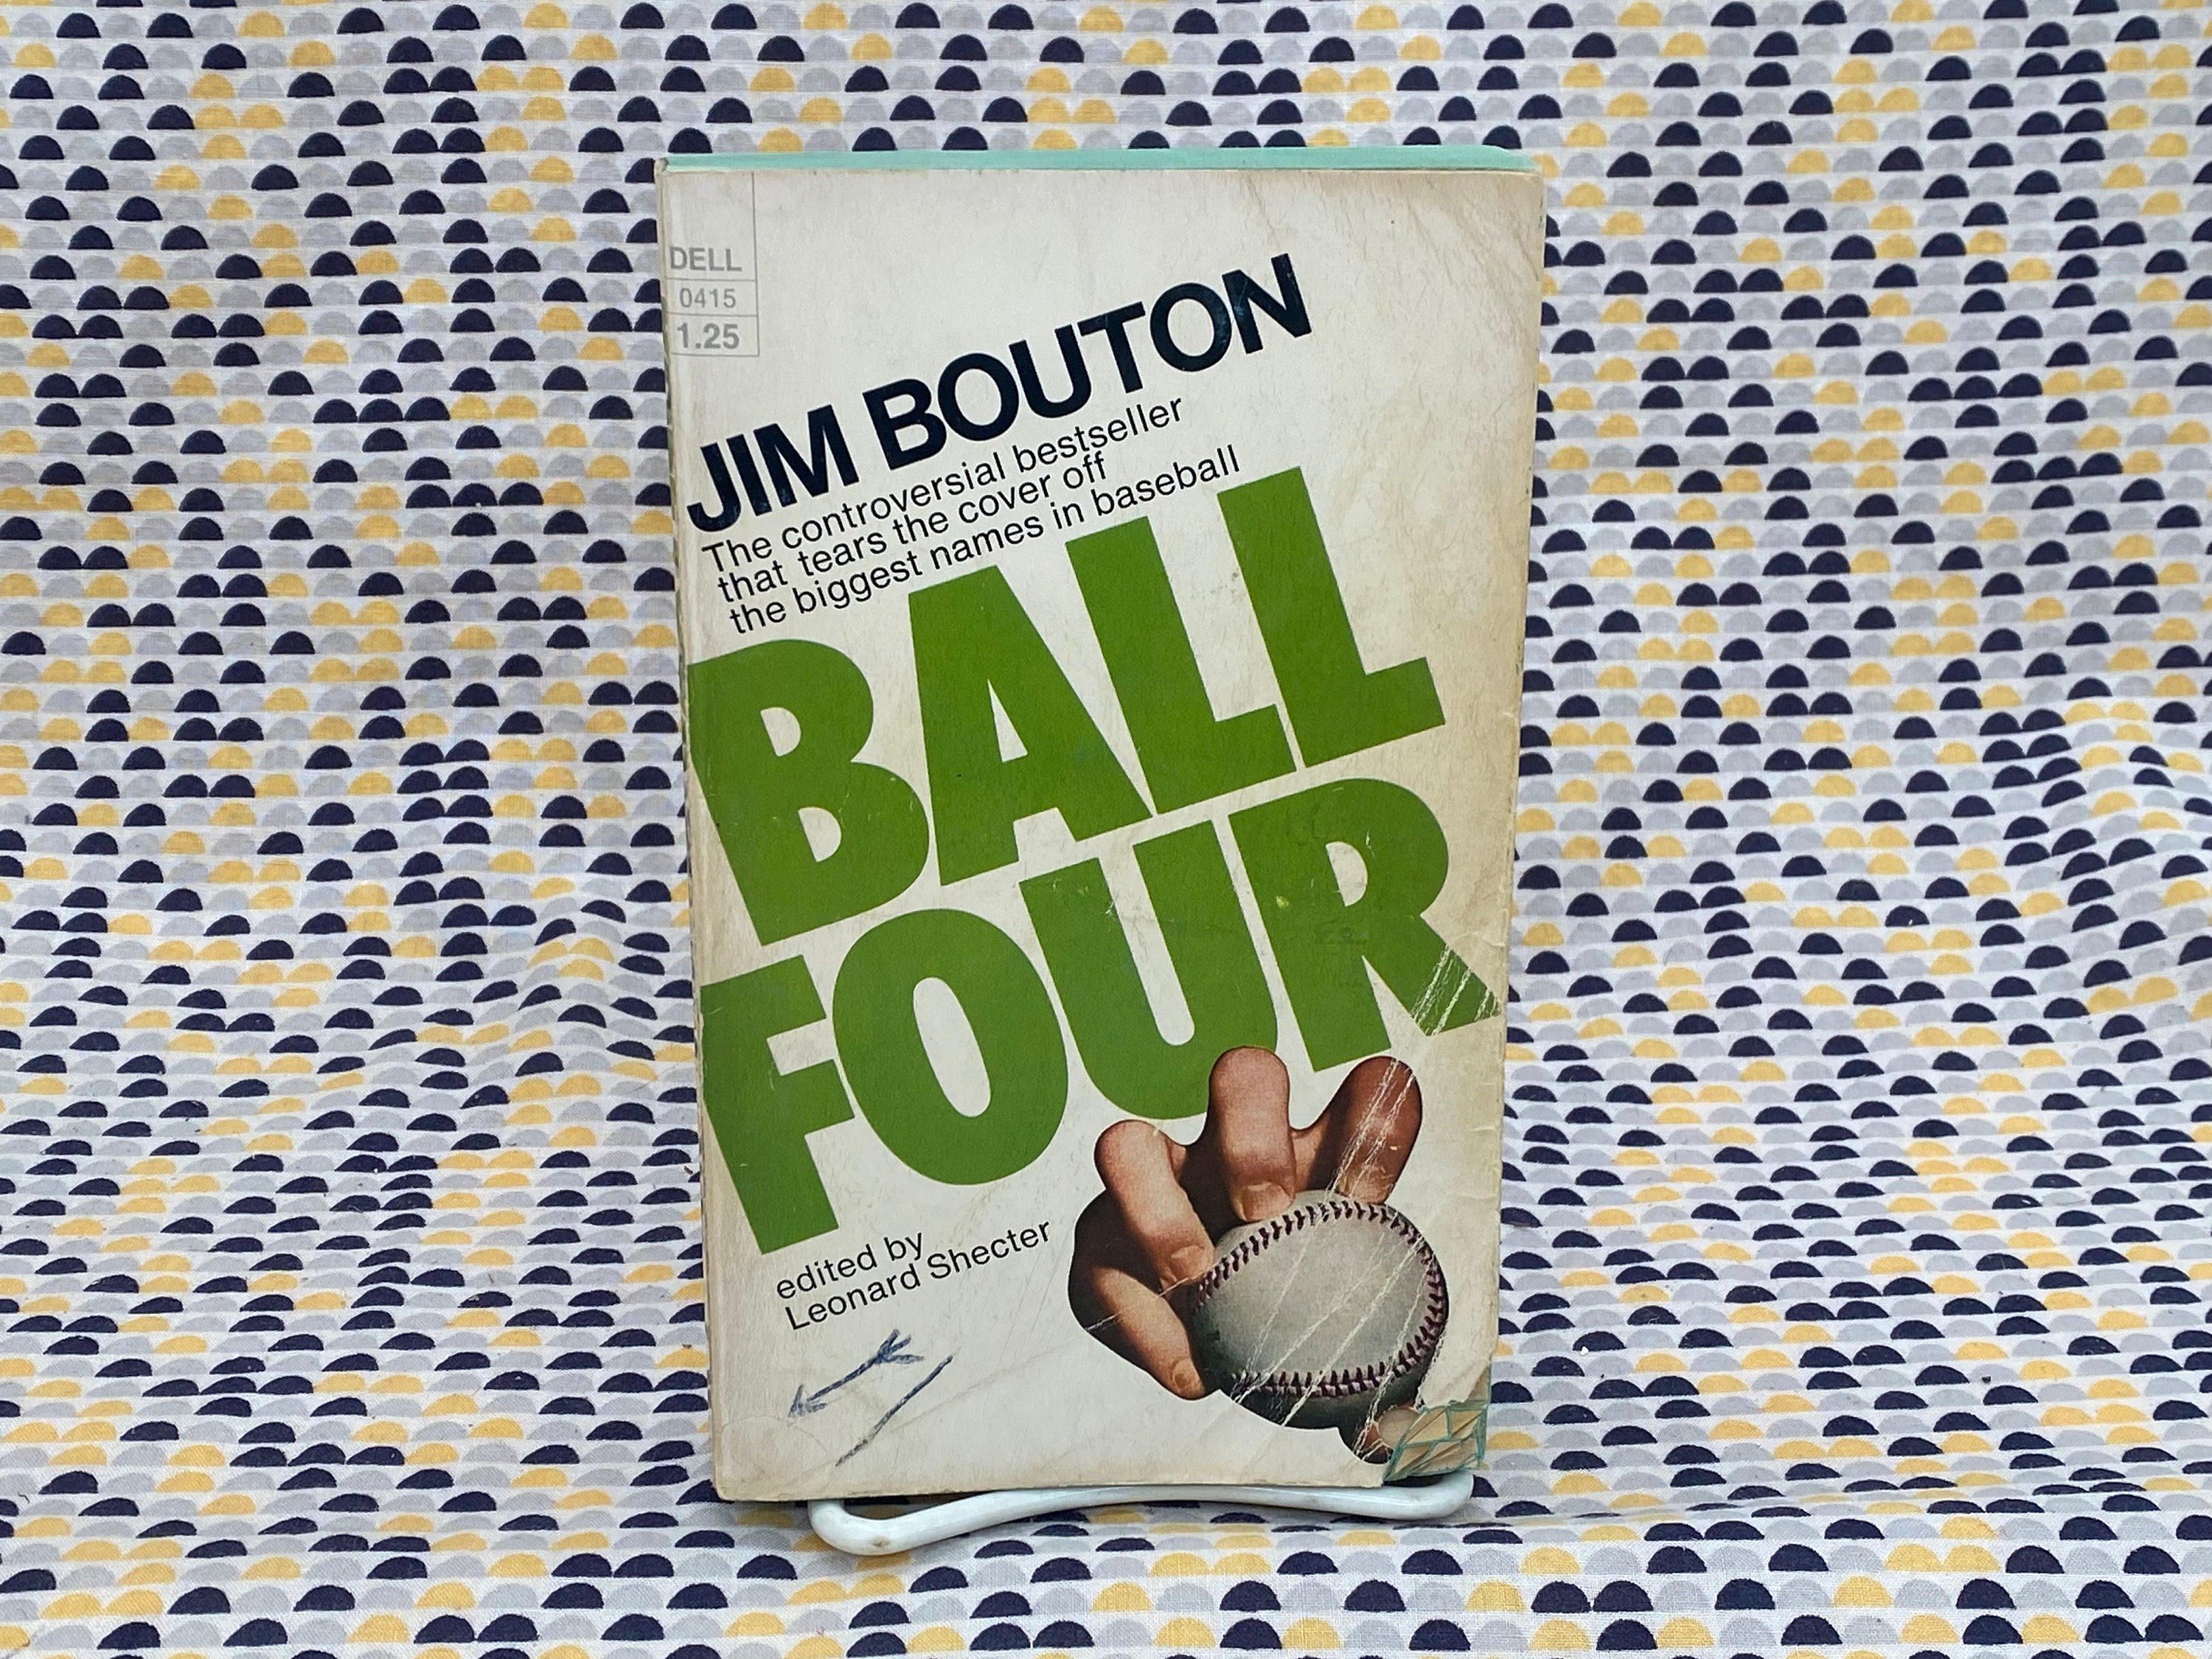 Jim Bouton Ball Four Vintage Paperback Book Dell Edition 